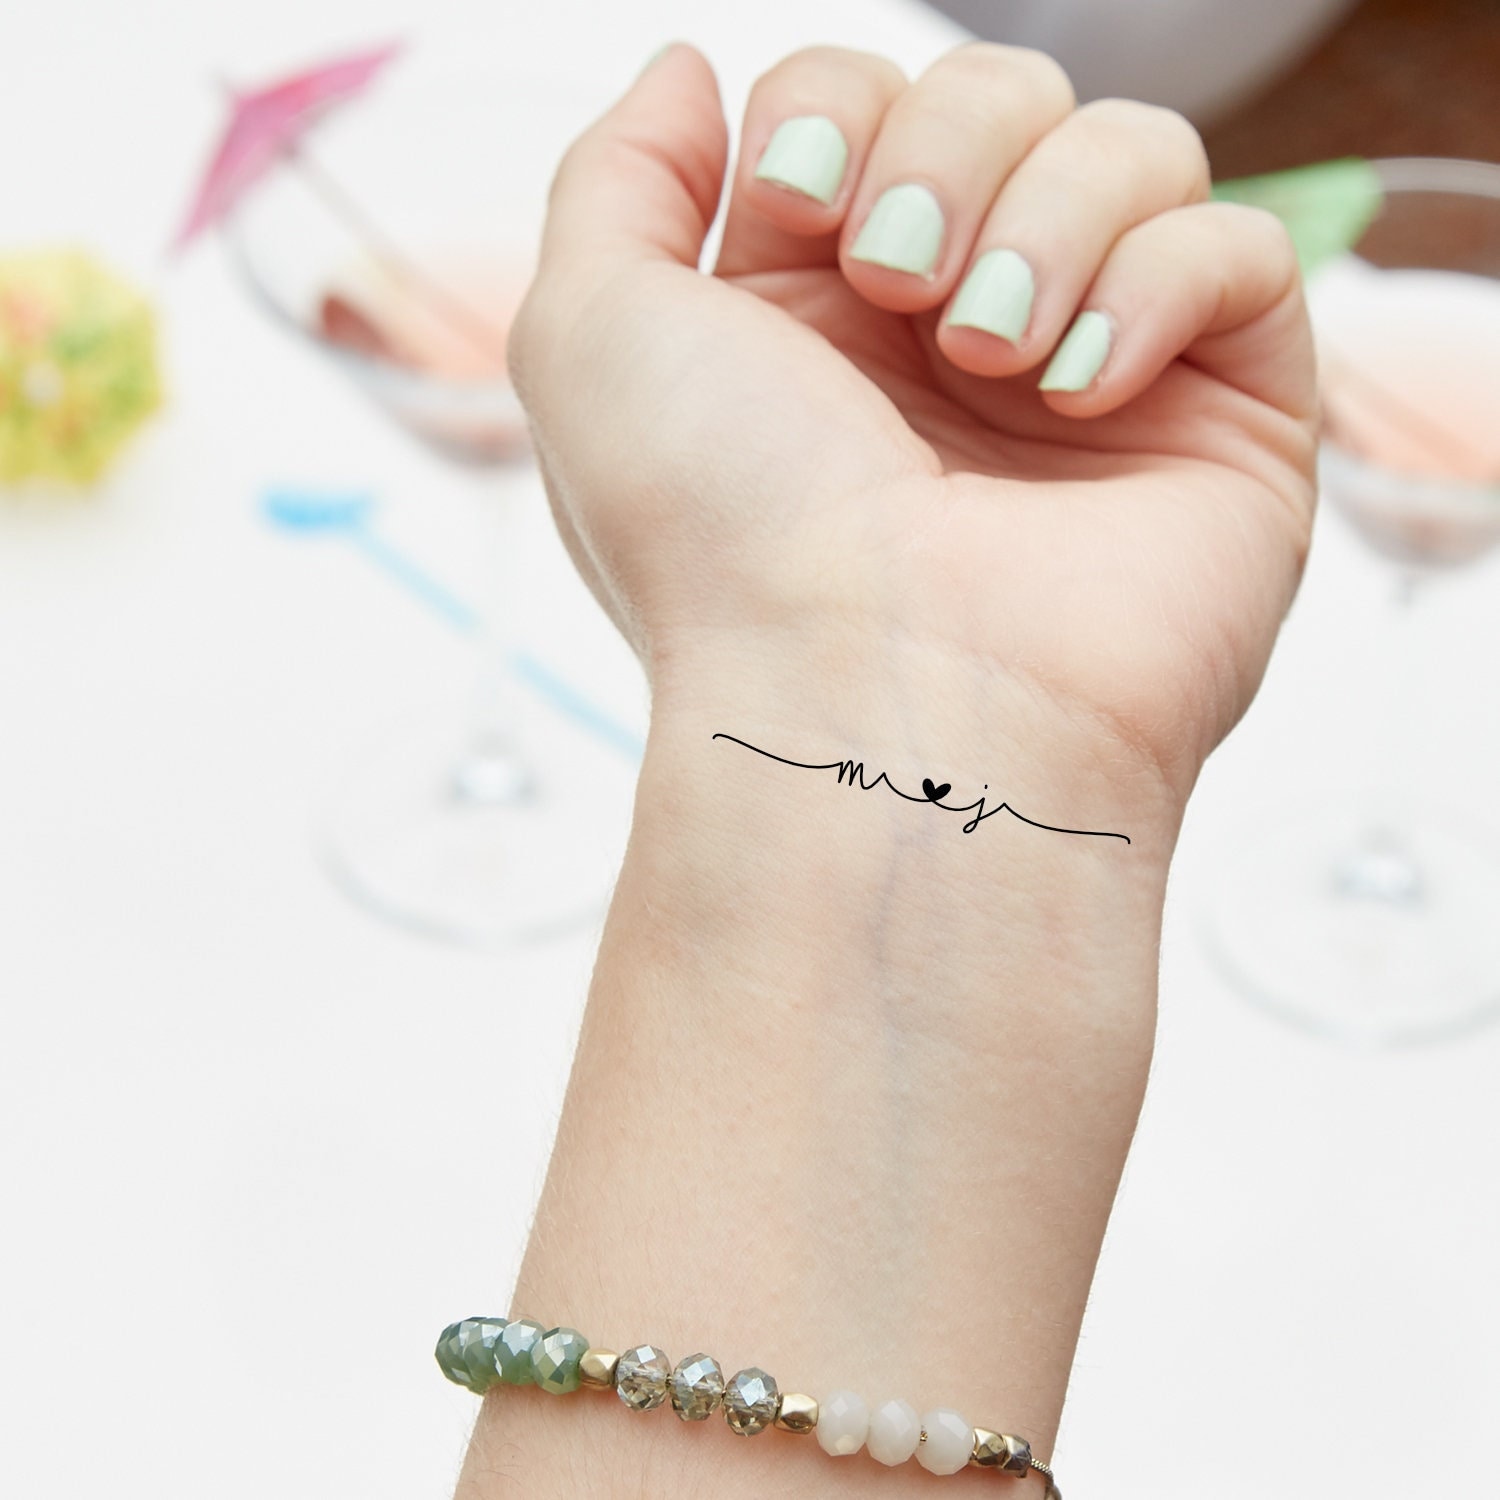 The Ankle Bracelet Tattoo represents hope,love,passion and new  beginnings.The bold line makes a pretty design to flaunt on your ankle and…  | Instagram